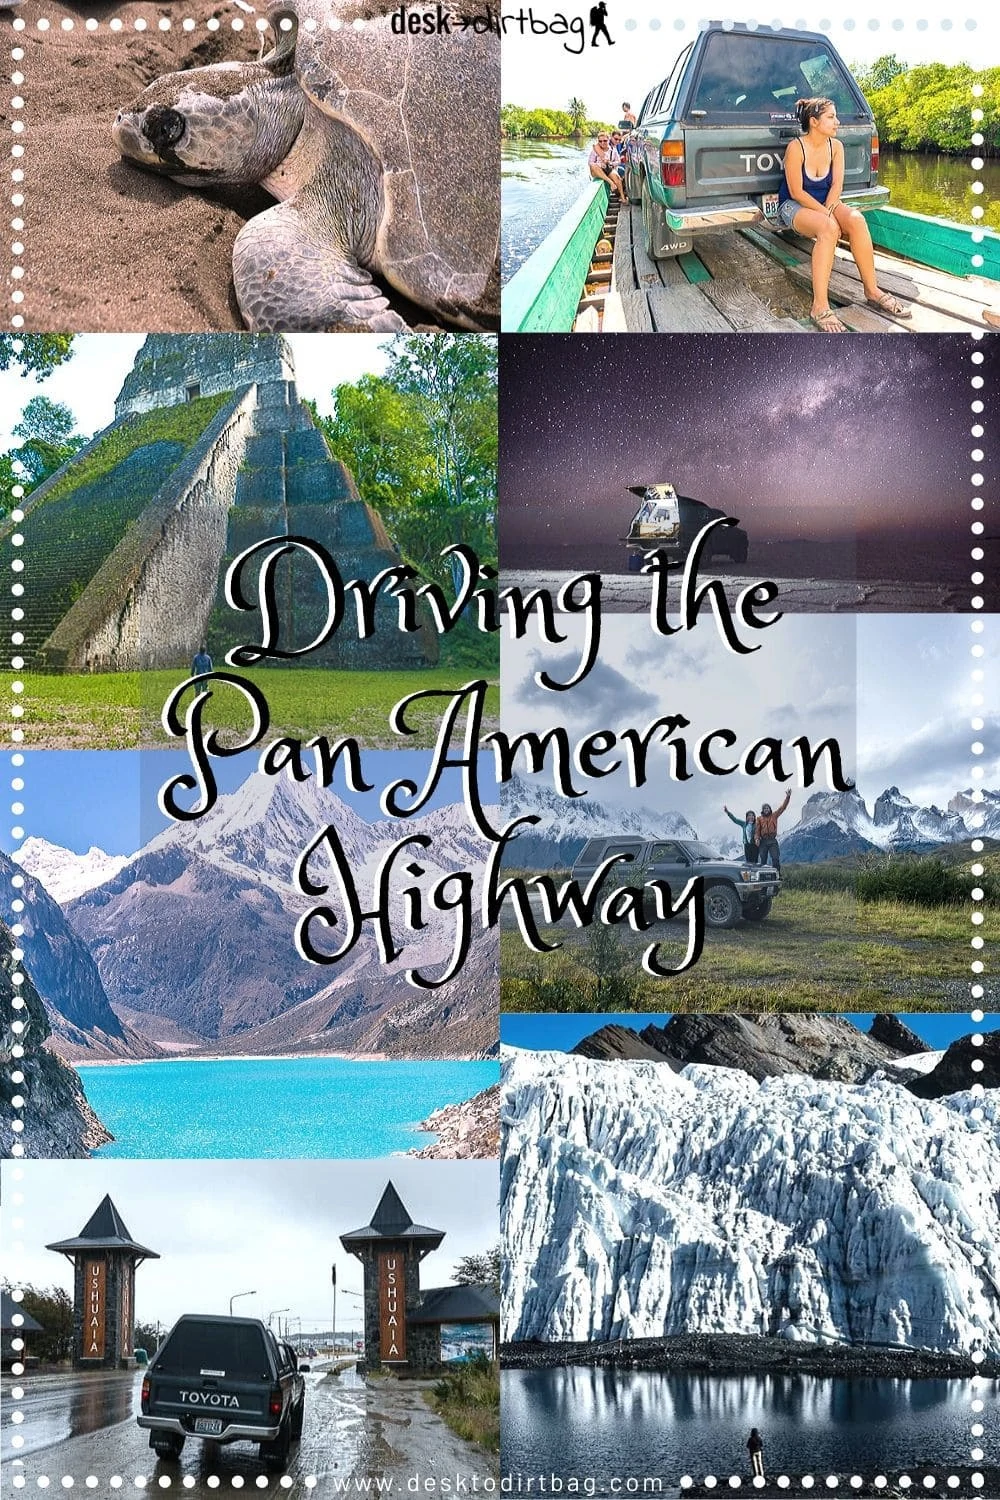 The Ultimate Road Trip - Driving the Pan American Highway